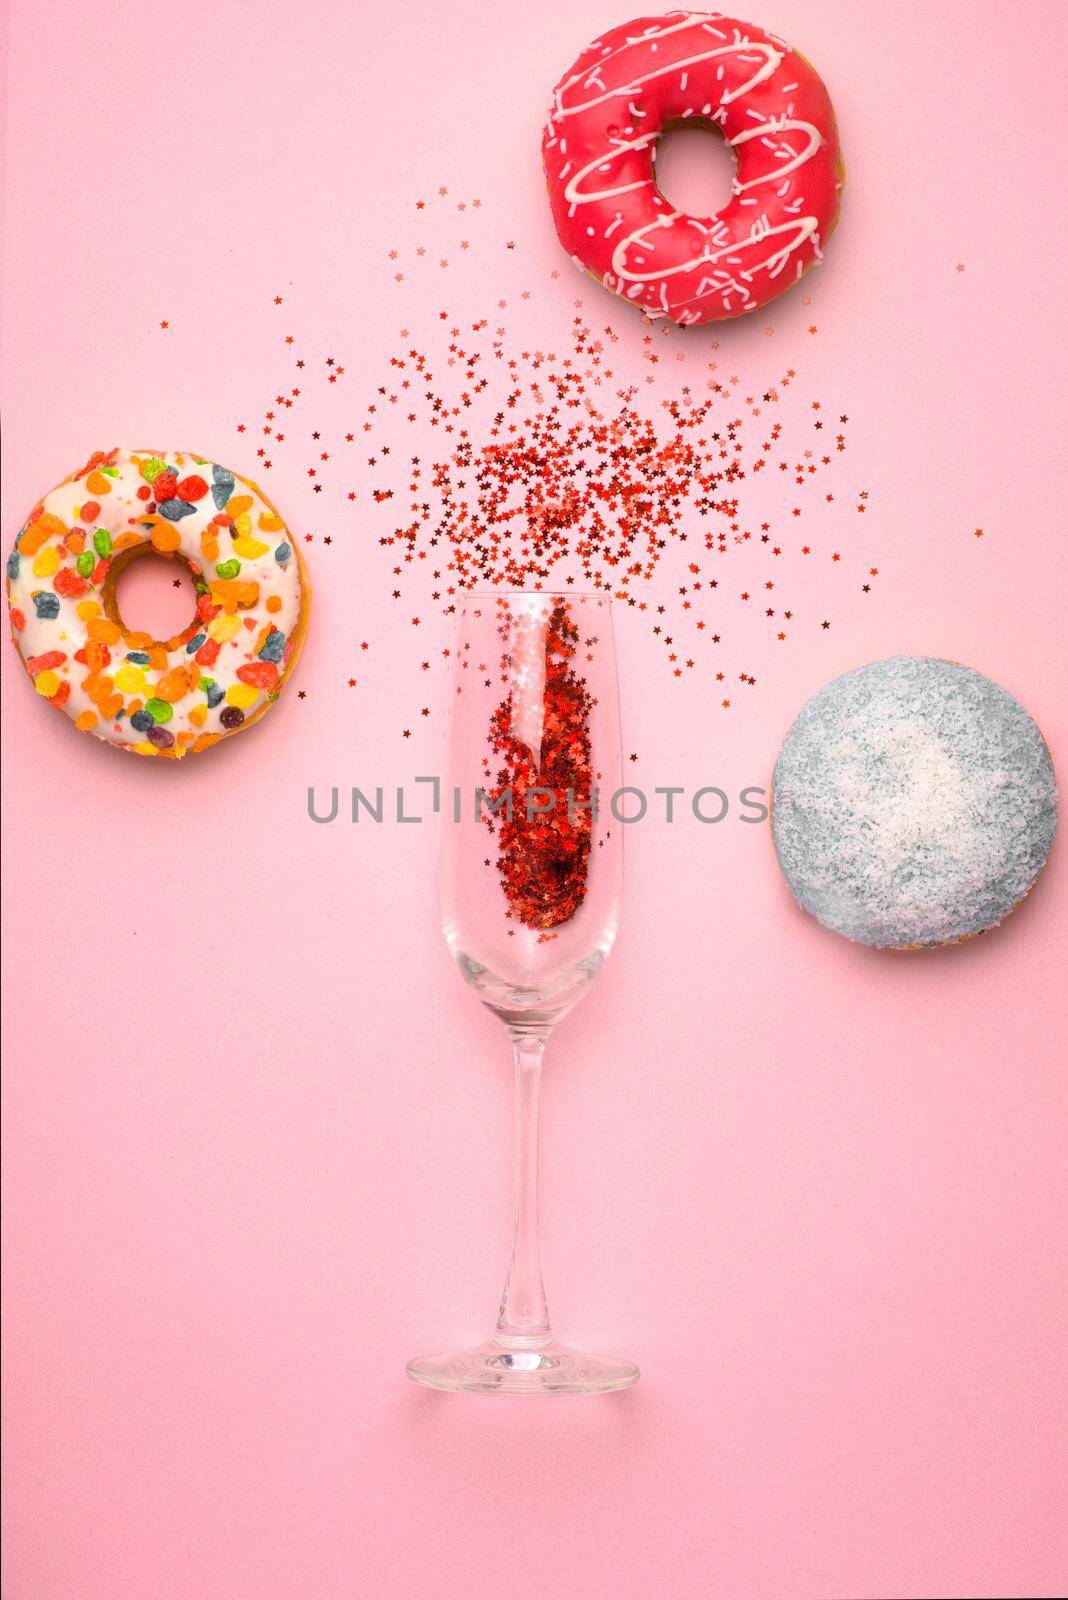 Flat lay of Celebration. Champagne glass with colorful party streamers and delicious donuts on pink background.